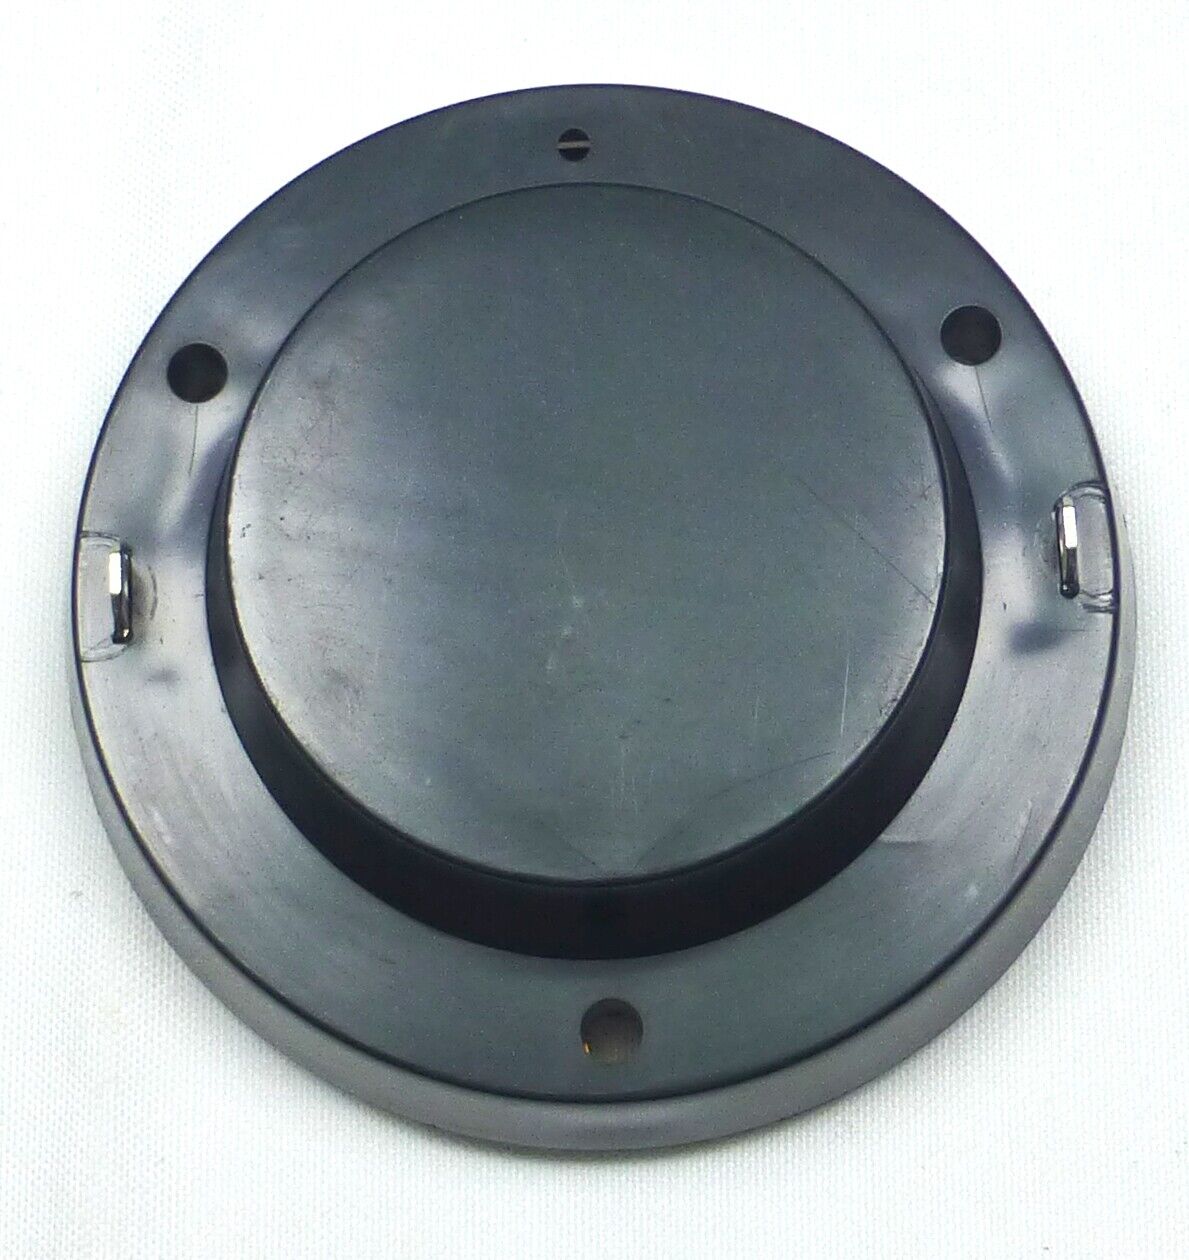 Replacement 8 Ohm Diaphragm for JBL 2415,2416,2417,2415H,2416H-1 H.